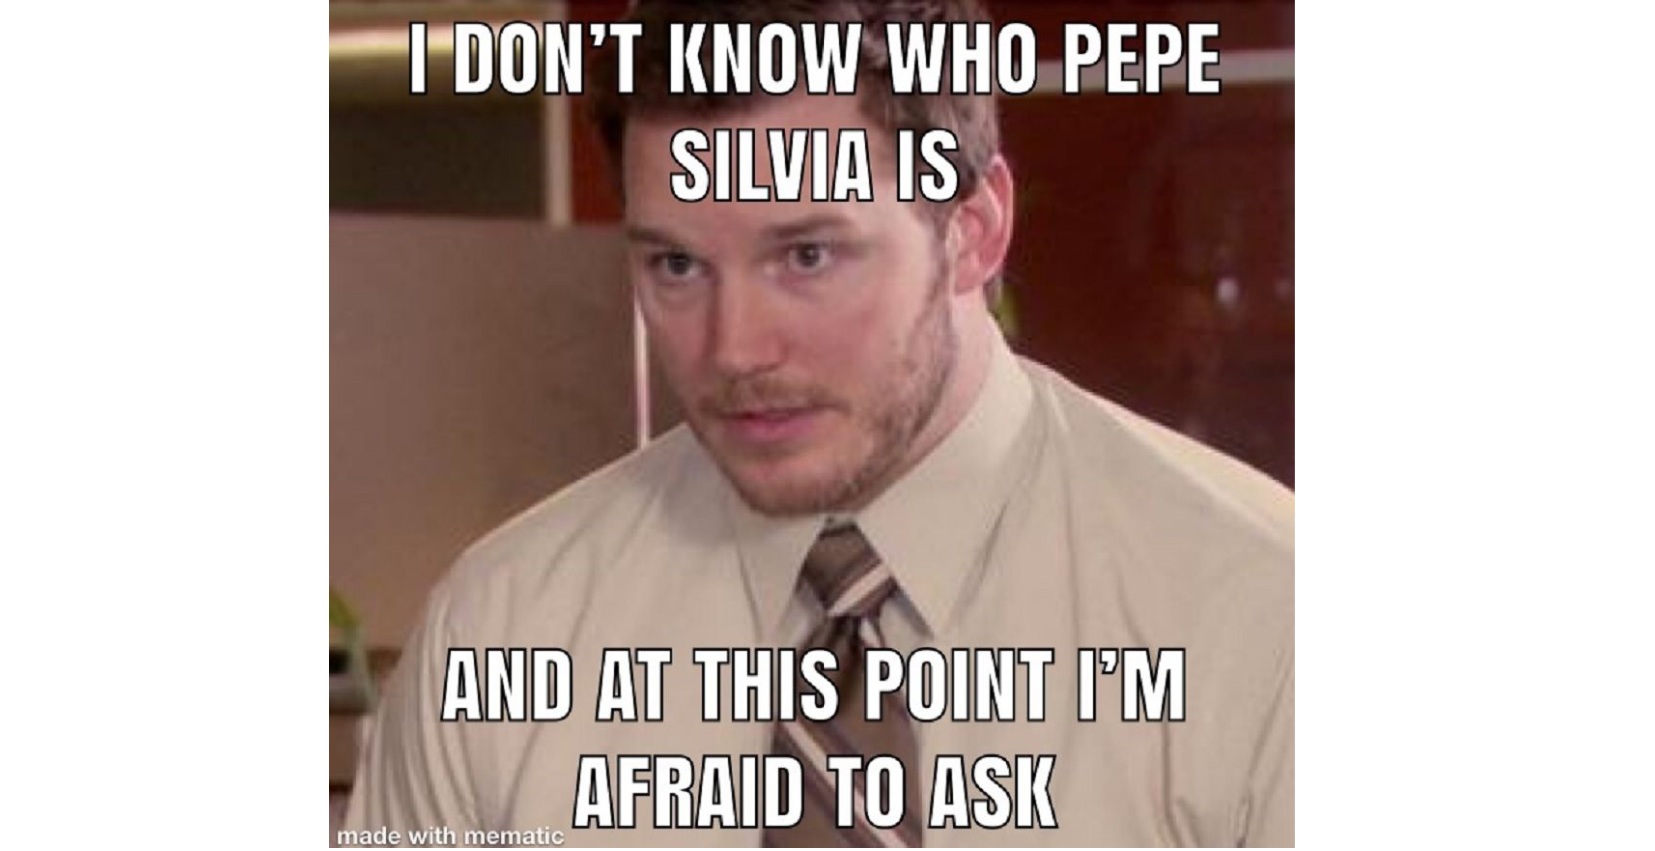 It's Always Sunny 10 Pepe Silvia Memes That Will Make You CryLaugh